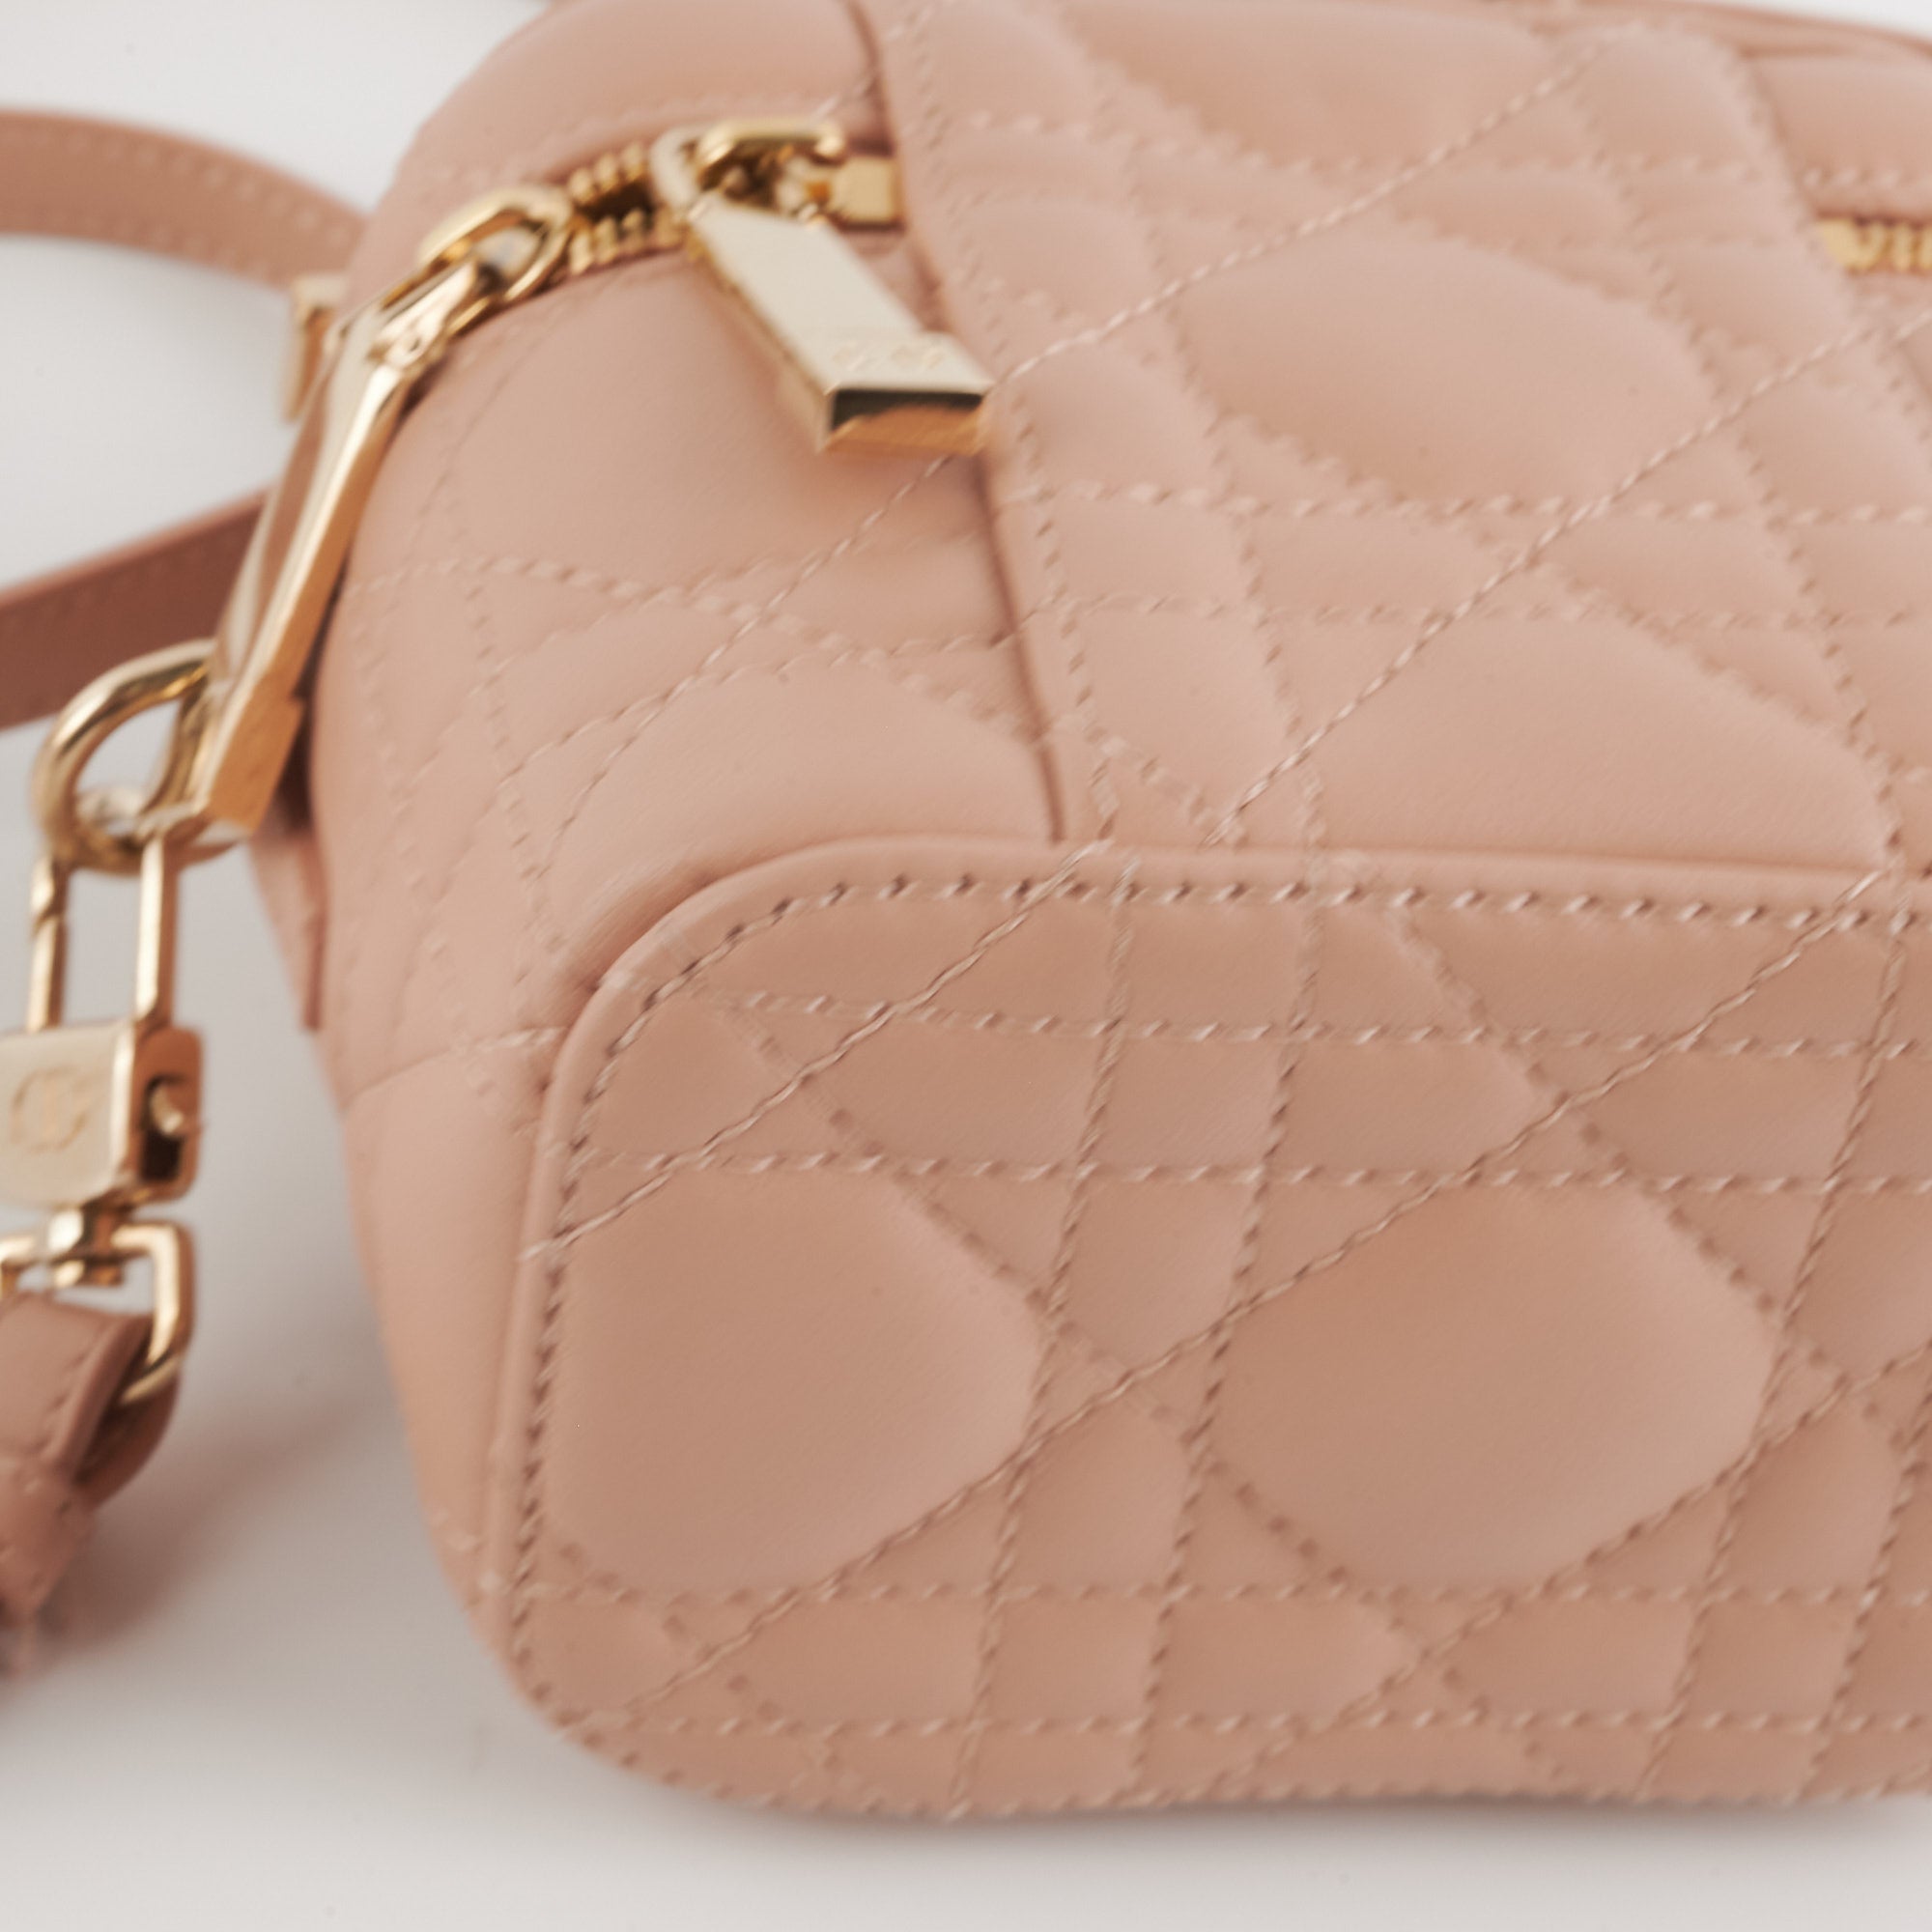 Dior - Lady Dior Micro Bag Rose des Vents Cannage Lambskin - Women